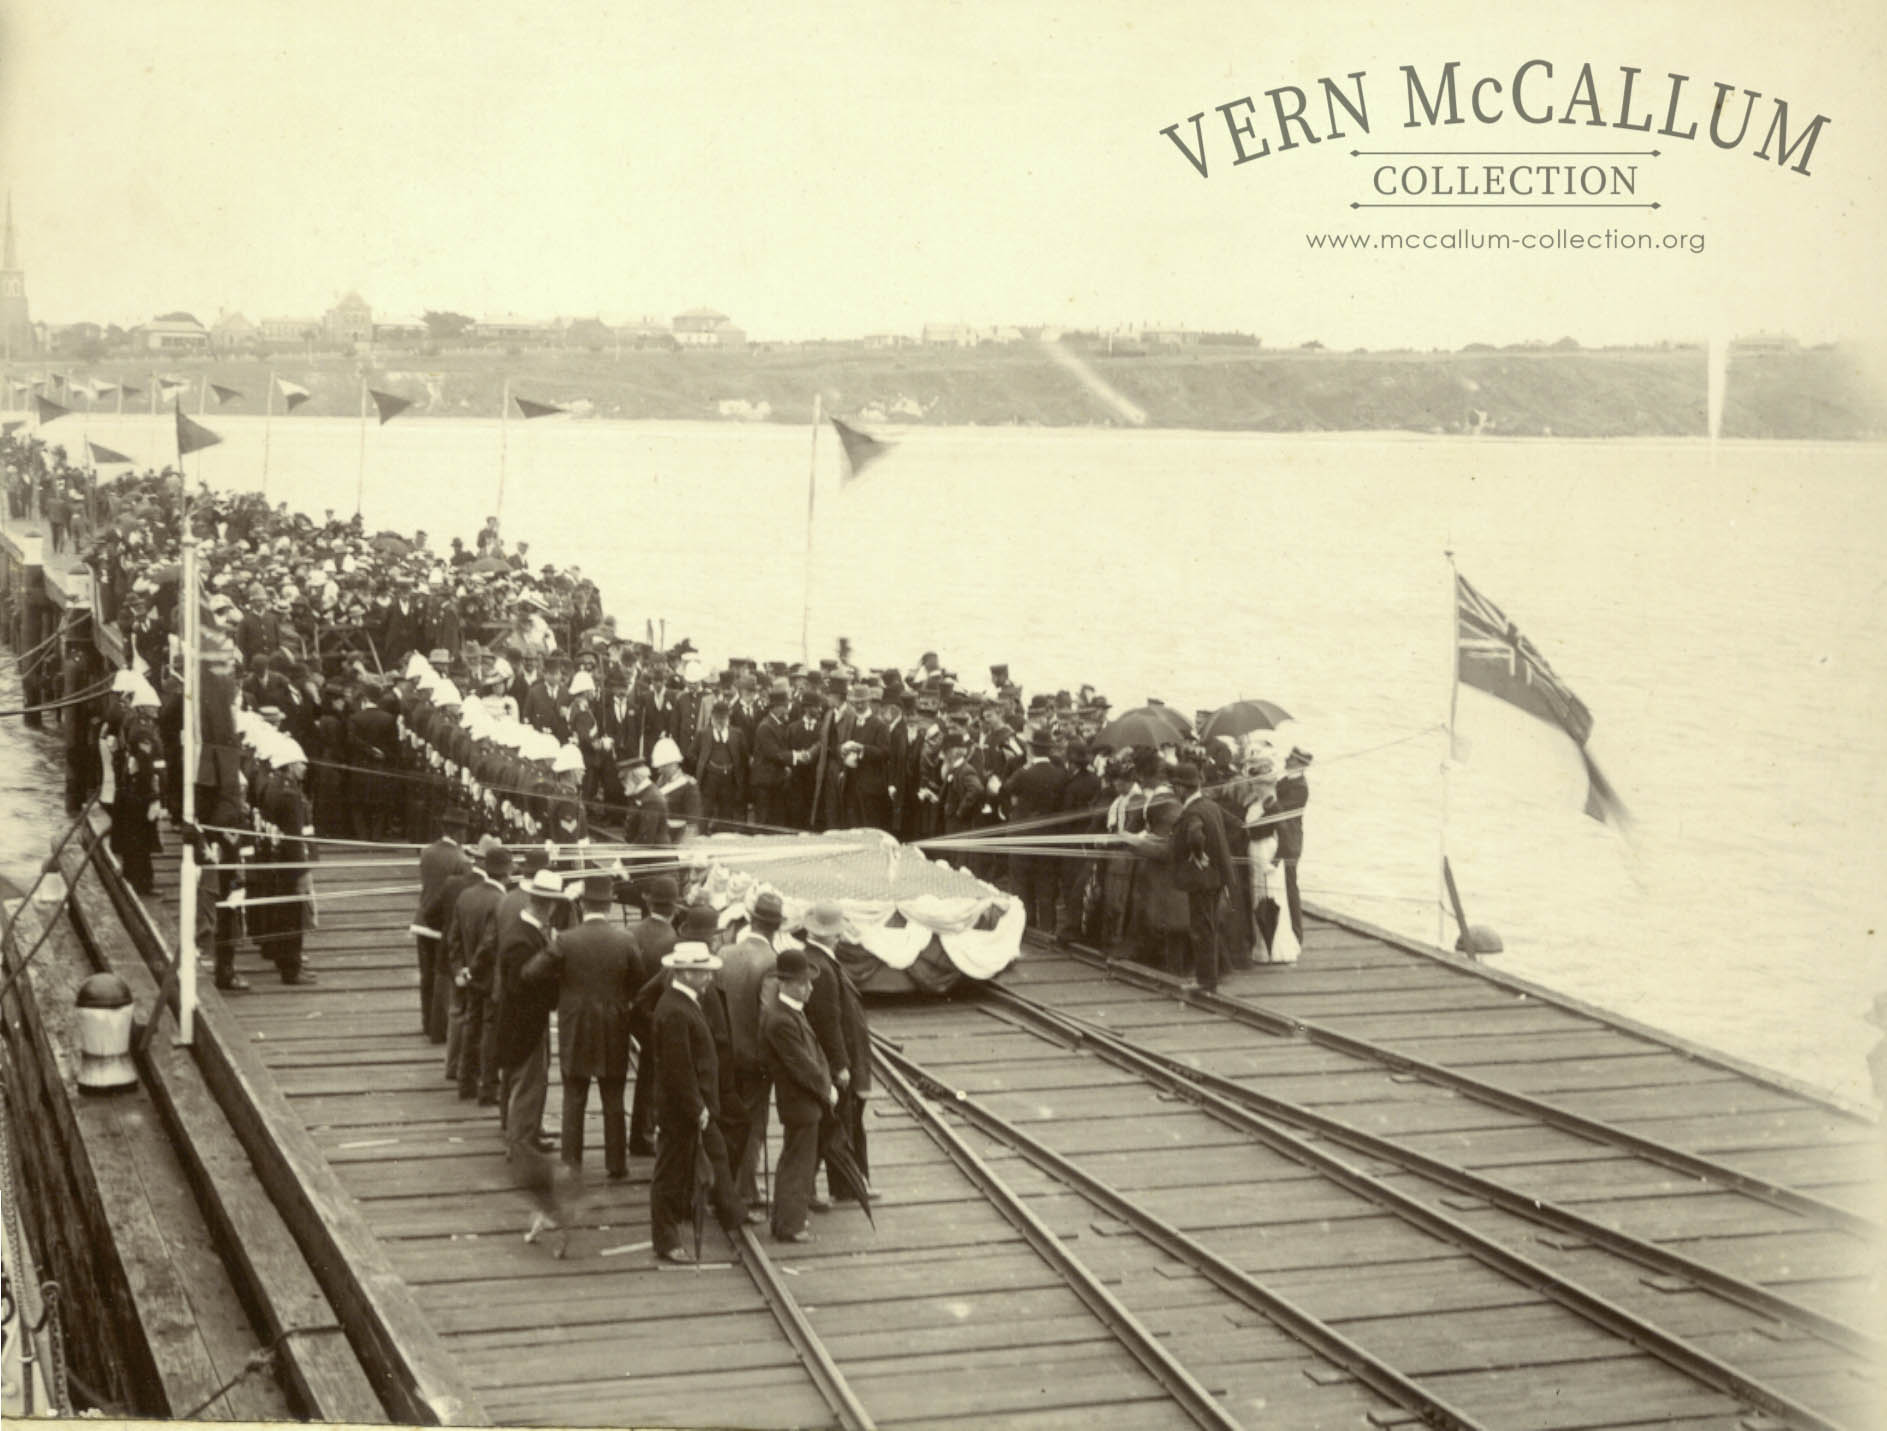 Official Opening of the New Pier, February 13th, 1902.
Mr K.S. Anderson suggests that the following people were probably present, at the Official Opening by Hon W. McCulloch --
The Mayor of Portland, Cr Wm Hanlon.
Councillors: (Dr) Levis, E. Adams, Wm Heaney, E.W, Harvey, G.H. Tulloh, J. Wiltshire, Ben Davis, W.L. Gray.
Town Clerk and Surveyor, Mr T.E.C. Henry.
Shire President,
Shire Secretary, Mr T. Tulloh and Shire Engineer, Mr C.C.P. Wilson.
Harbour Master, Pilot, of Portland, Captain Beaumont.
Mr Samuel Winter Cooke of "Murndal" elected 1901 as Member for Wannon.
Mr Ewan Cameron M.L.A (Re-elected 1900) Member for Portland, 1902.
Mr H.N.Reid, Manager of Freezing Works.
Mr H.J.M. Campbell, later member for Portland.
The Captain of the "Gulf of Siam" in port at the time.
Mr W.P. Anderson, Agent for the vessel.
The local Battery of Portland Militia, 1 officer & 26 men. Probably Major Hawkins.
Rear Admiral Beaumont of the "Royal Arthur", probably inspecting the guard. There were 5 vessels of the Australian Squardron in port.
Town Band.
Local Police.
Local Clergymen.
Identification - Mr H.J. Campbell (with beard) shaking hands with tall man (centre). Cr Wm Hanlon, short man with beard, hands on hip on West of Platform.The group nearest the camera probably councillors of borough, President, Secretary and Engineer of Shire and Mr T.E.C. Henry (town clerk).
The flag at the right is the Flag of the British Navy.
In background - All Saints Church, Loreto Convent, Victoria House, The Benevolent Asylum.